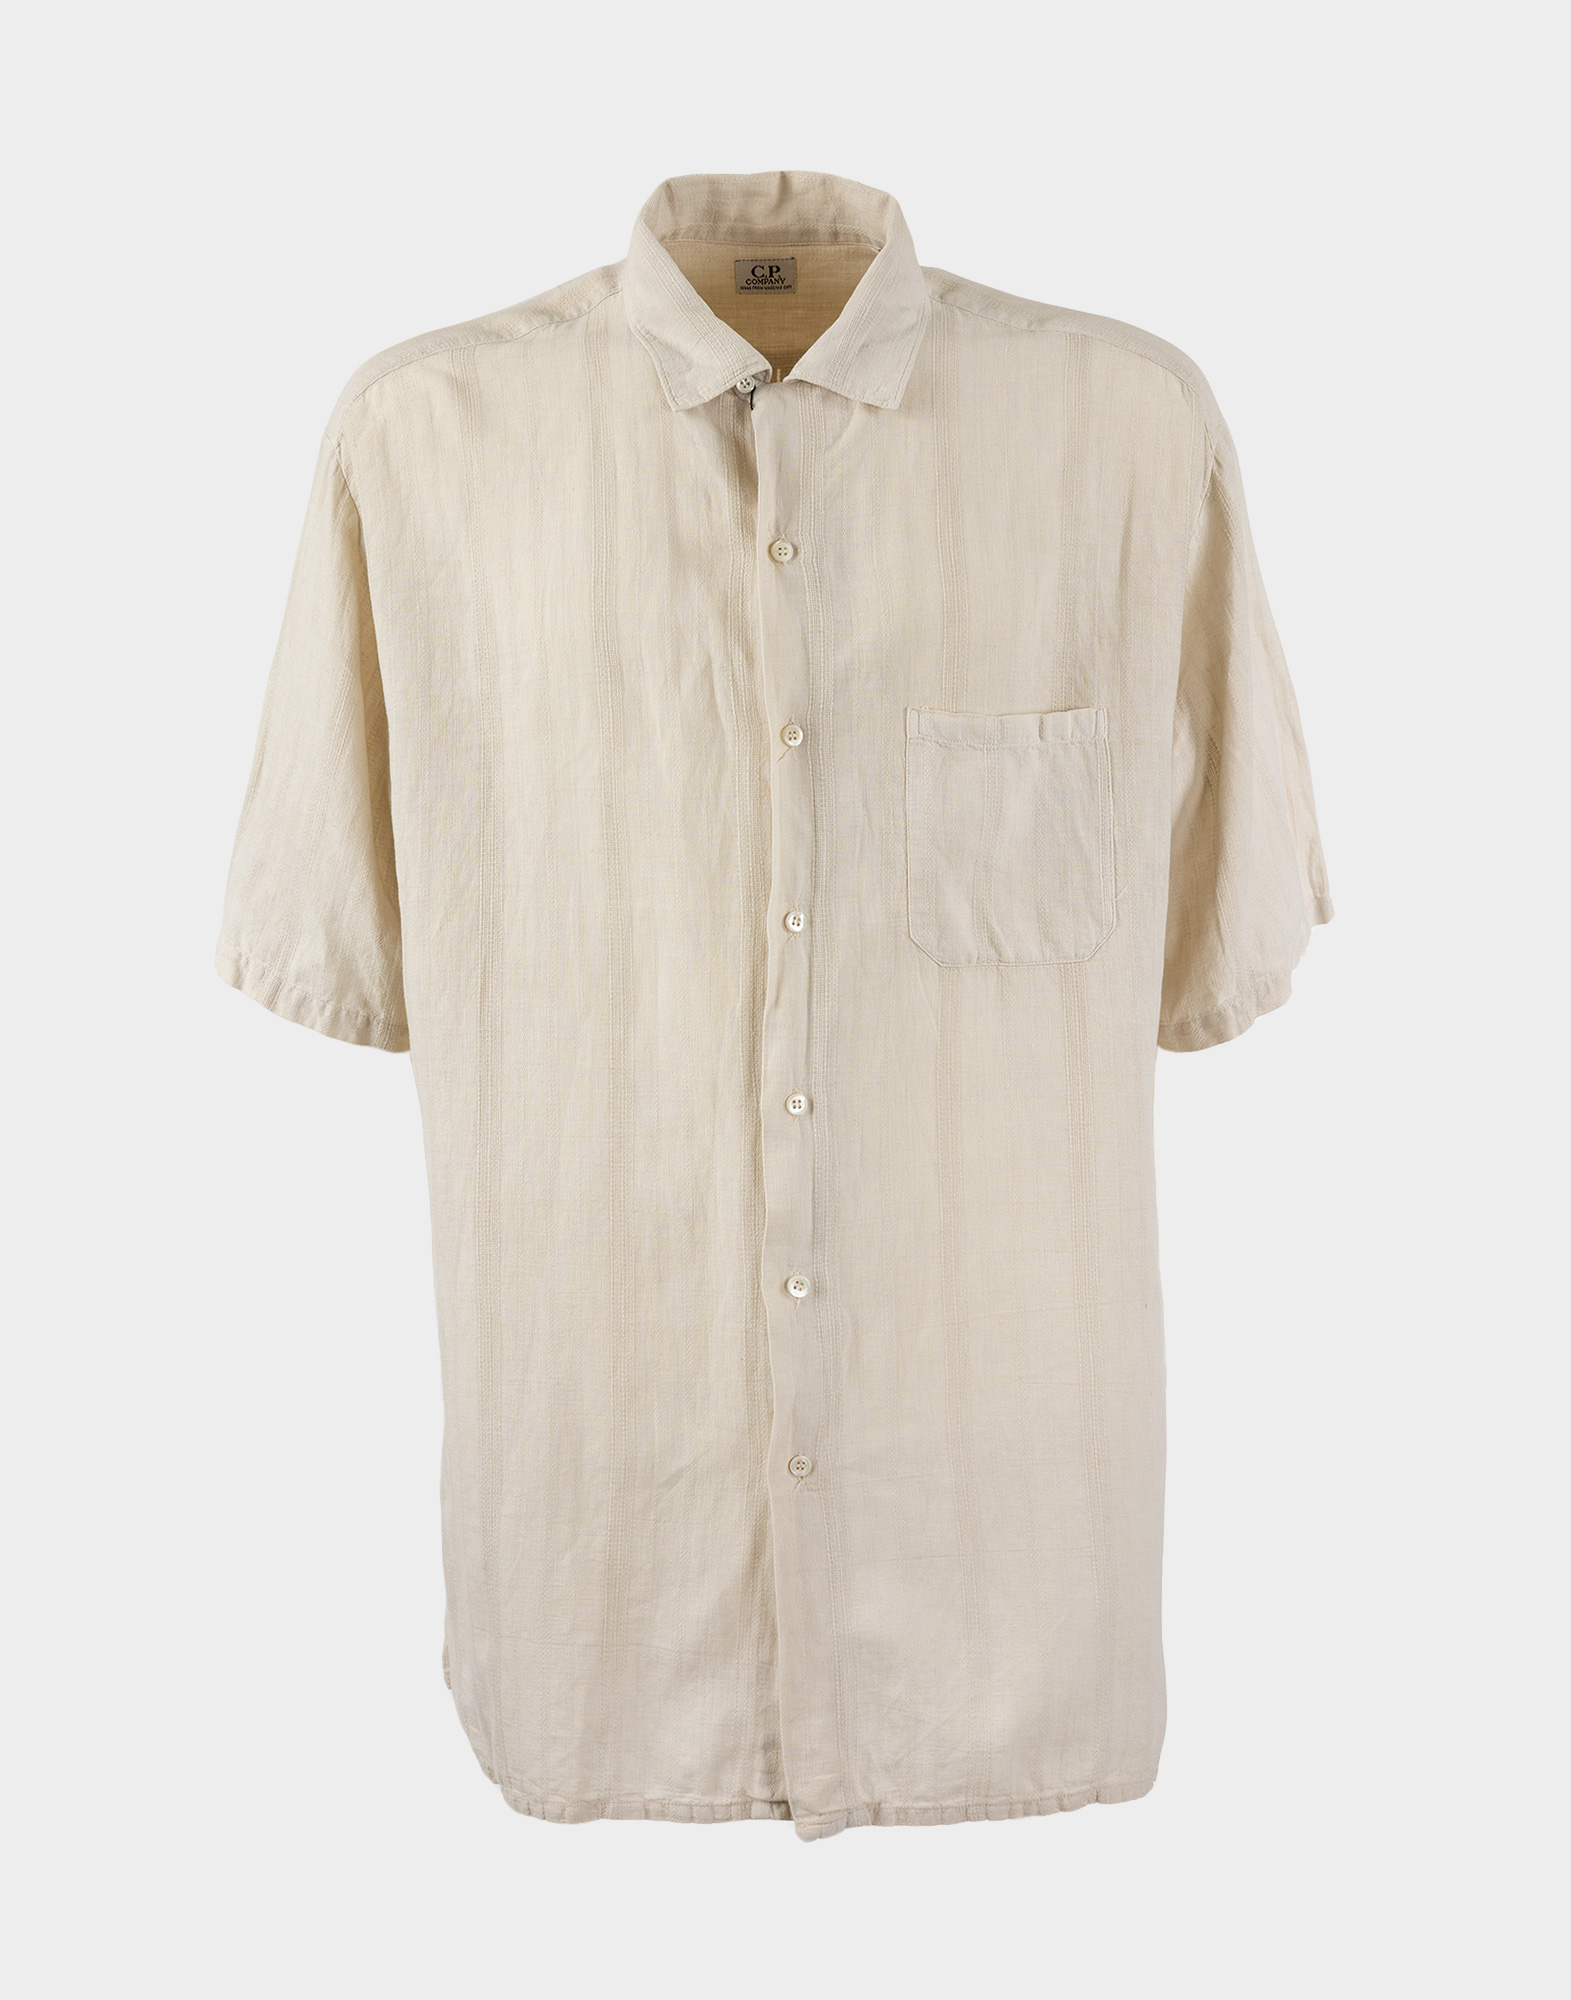 beige men's linen shirt with short sleeves and front pocket